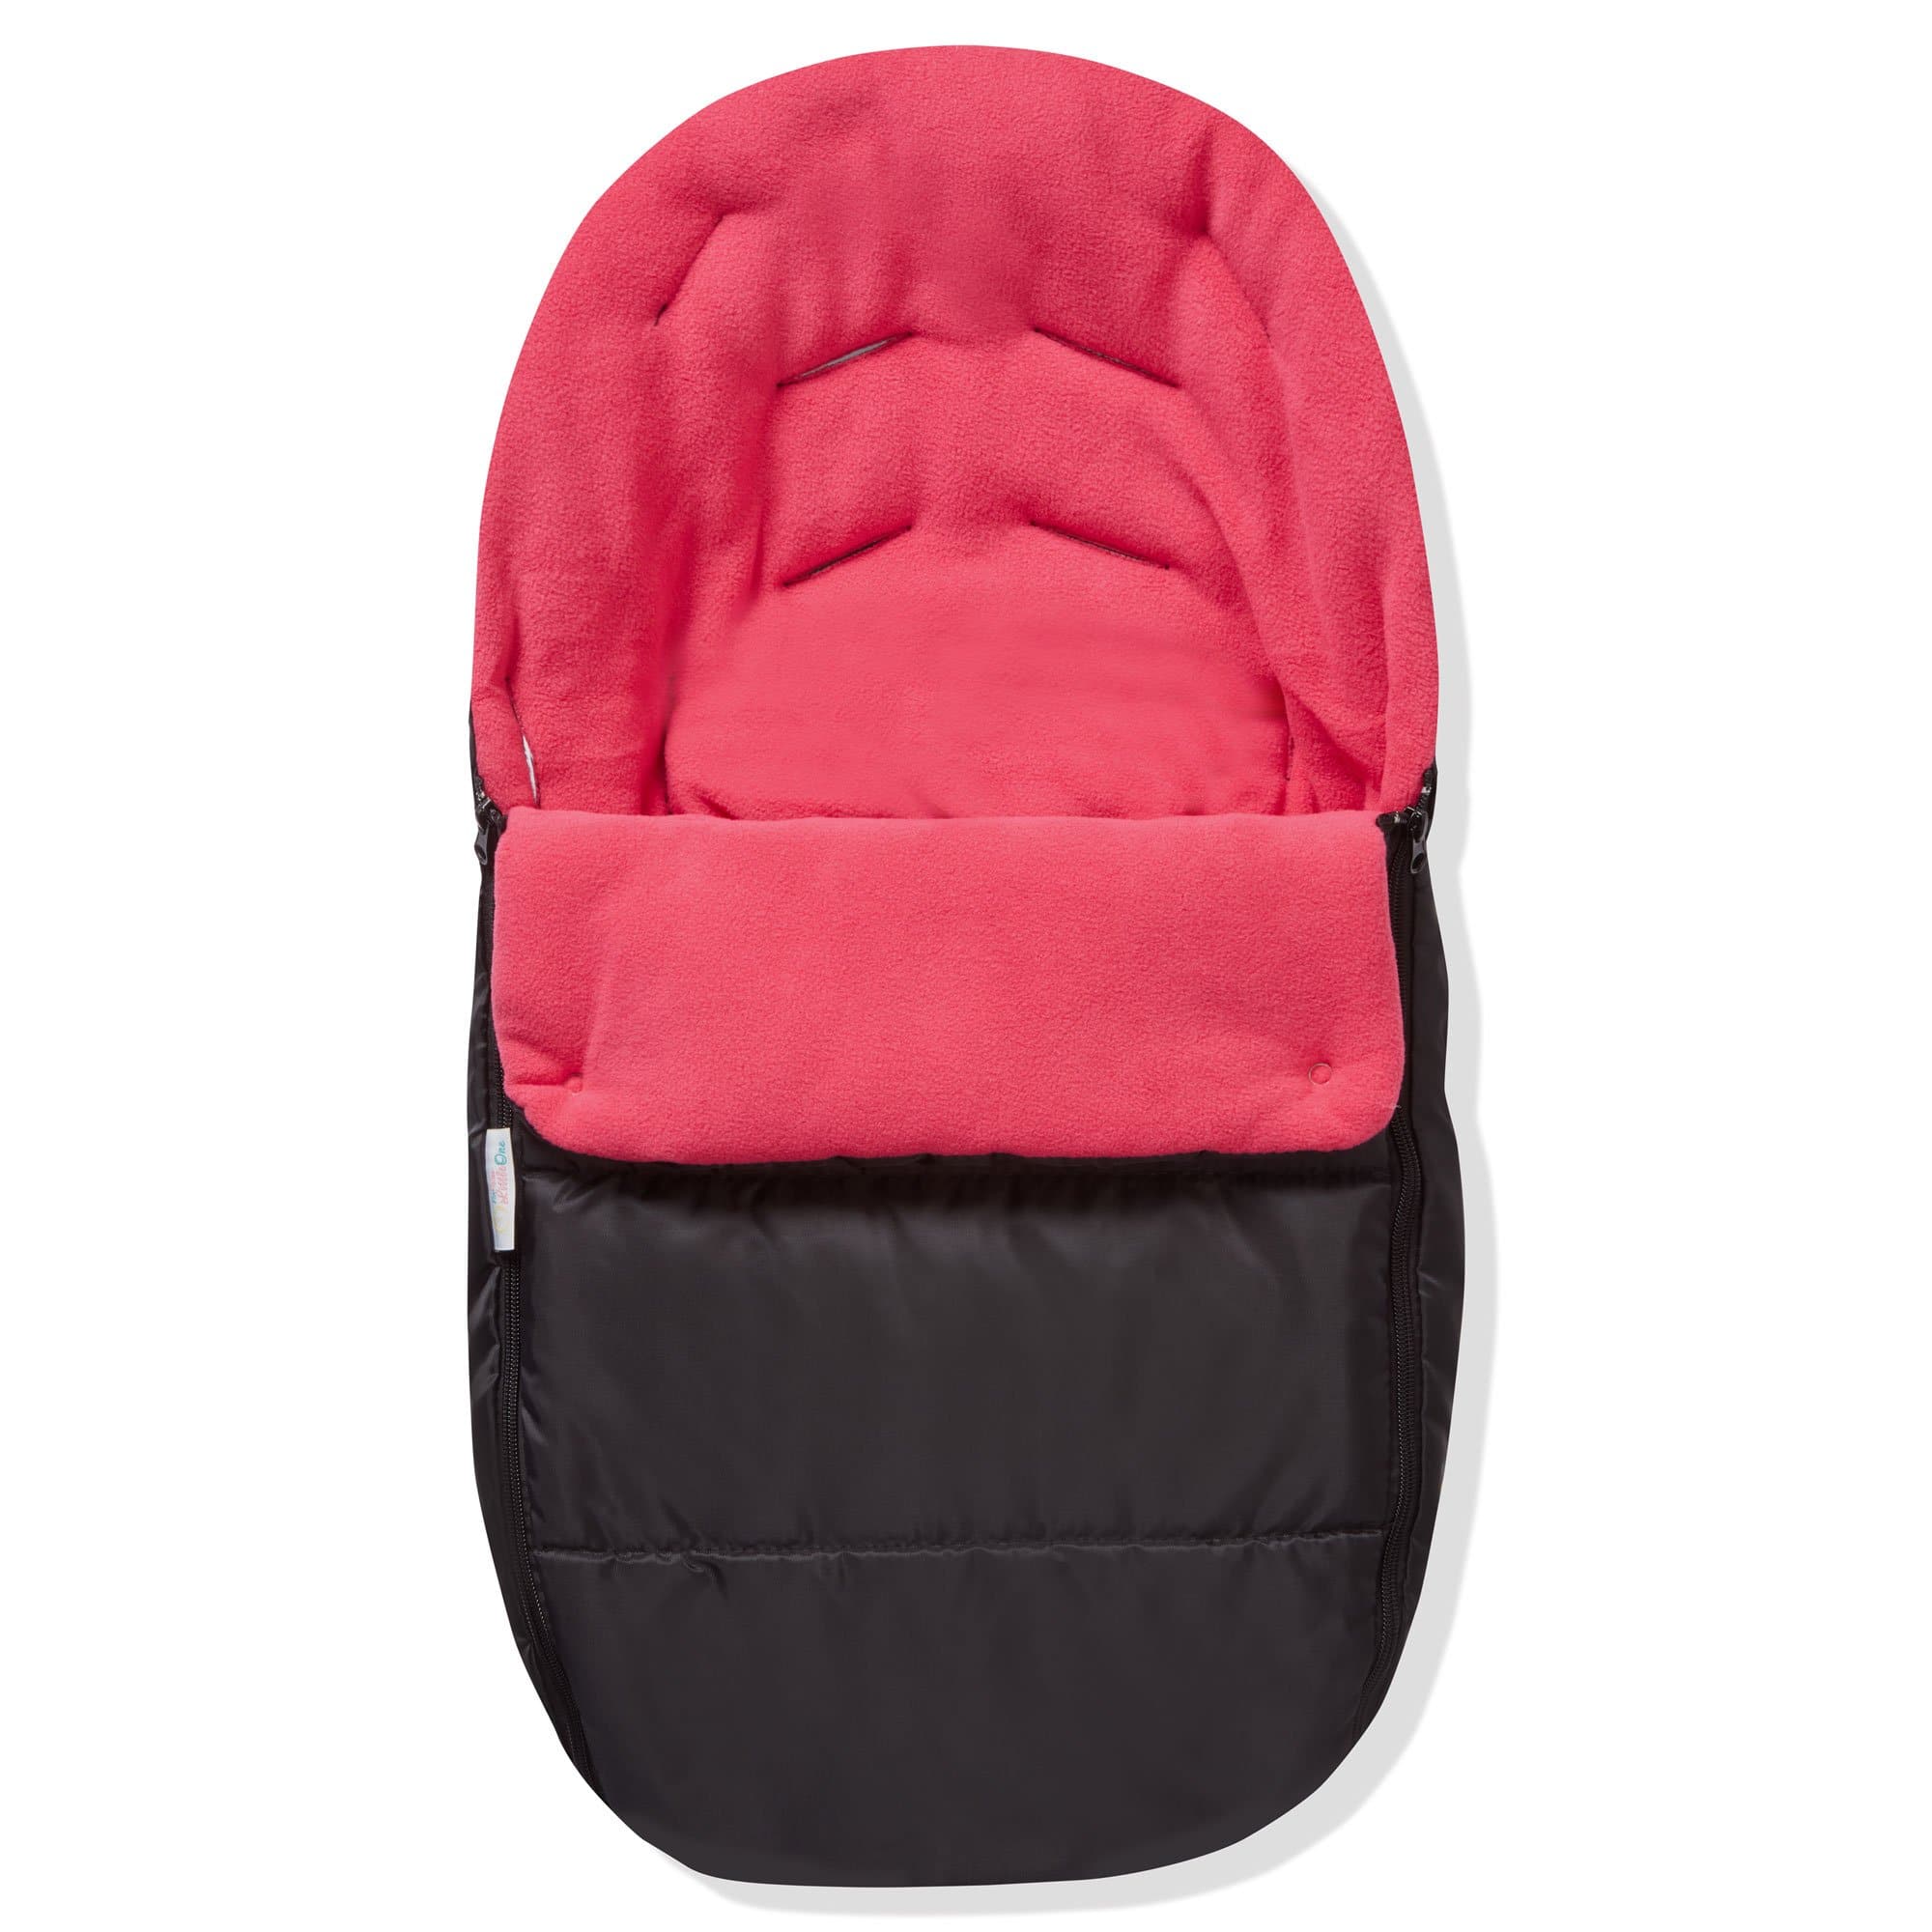 Premium Car Seat Footmuff / Cosy Toes Compatible With Roma - For Your Little One